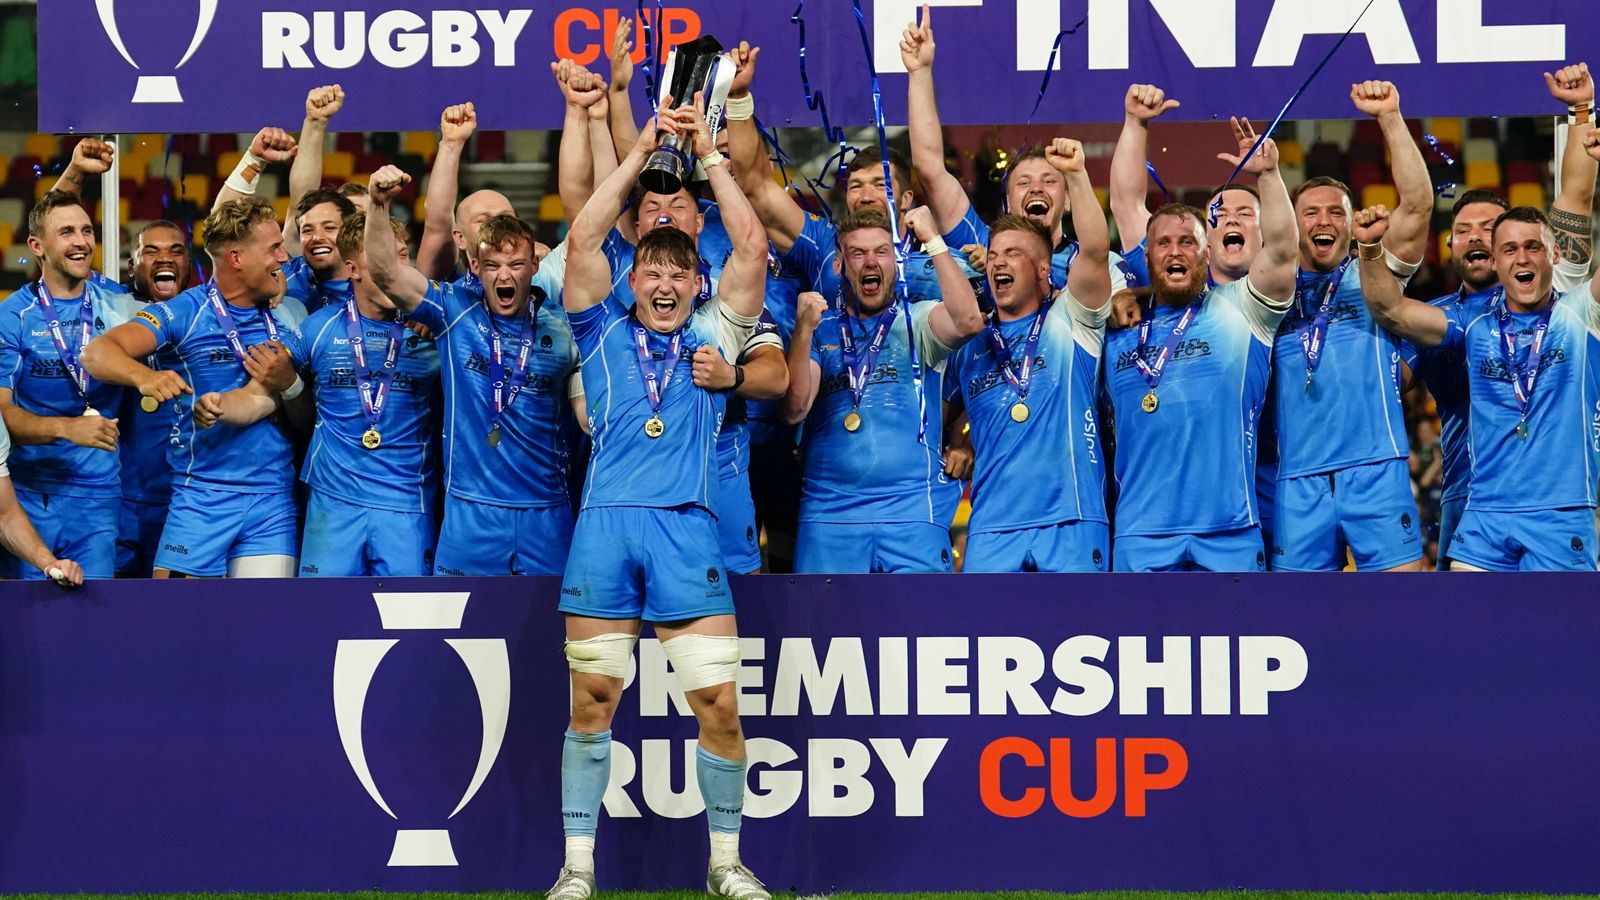 Premiership Rugby Cup Final Worcester win after dramatic extra time deadlock to claim first major trophy Rugby Union News Sky Sports